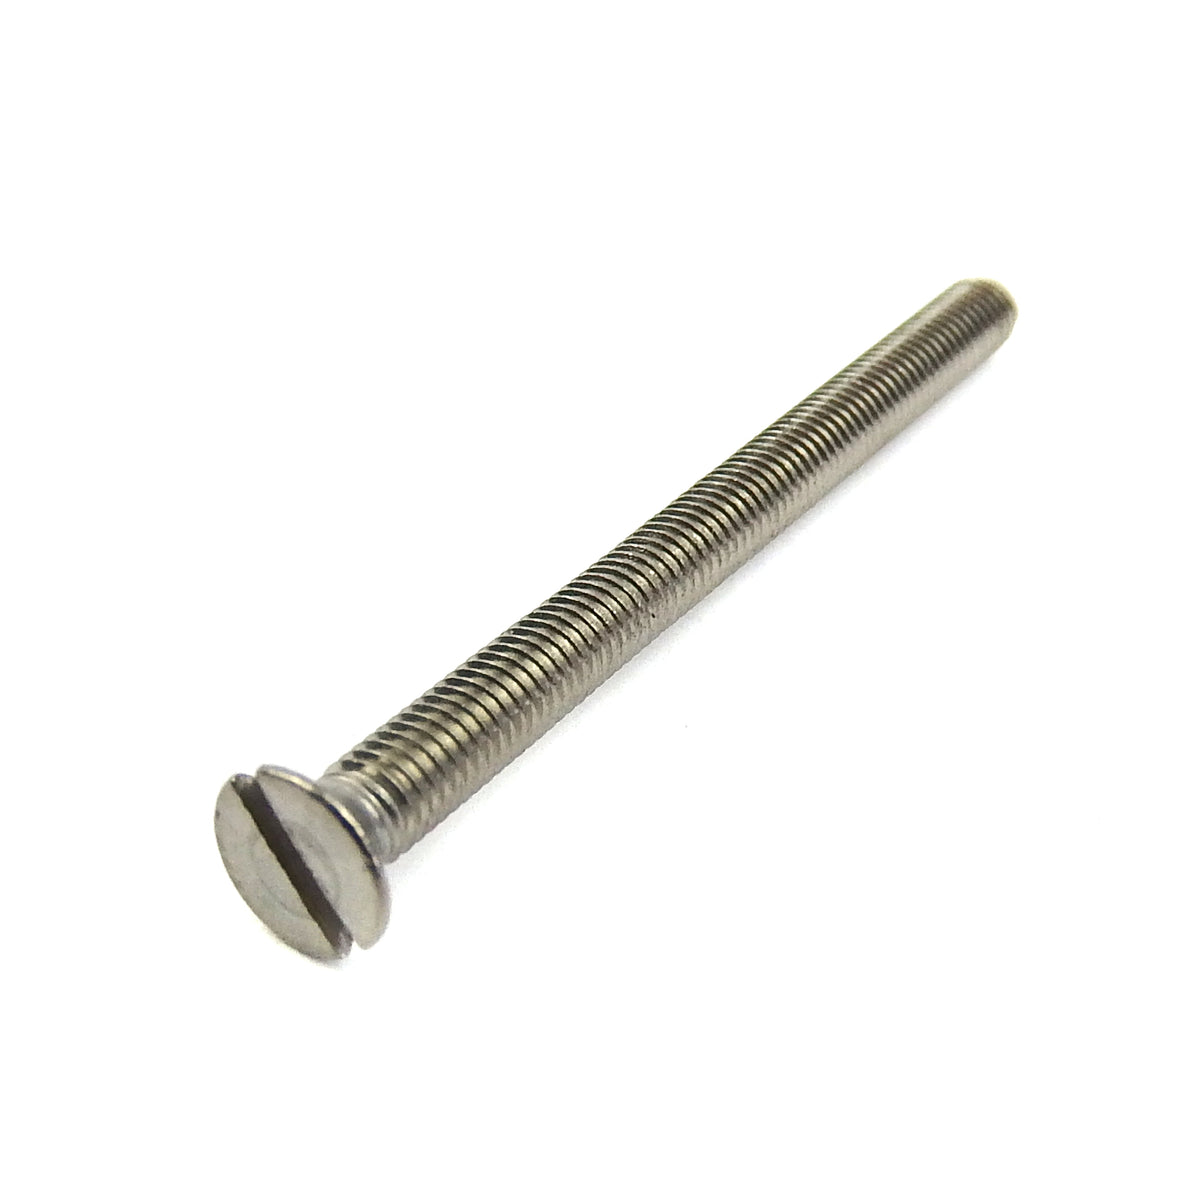 Counter Sunk Flat Screw M3 x 40mm in Stainless